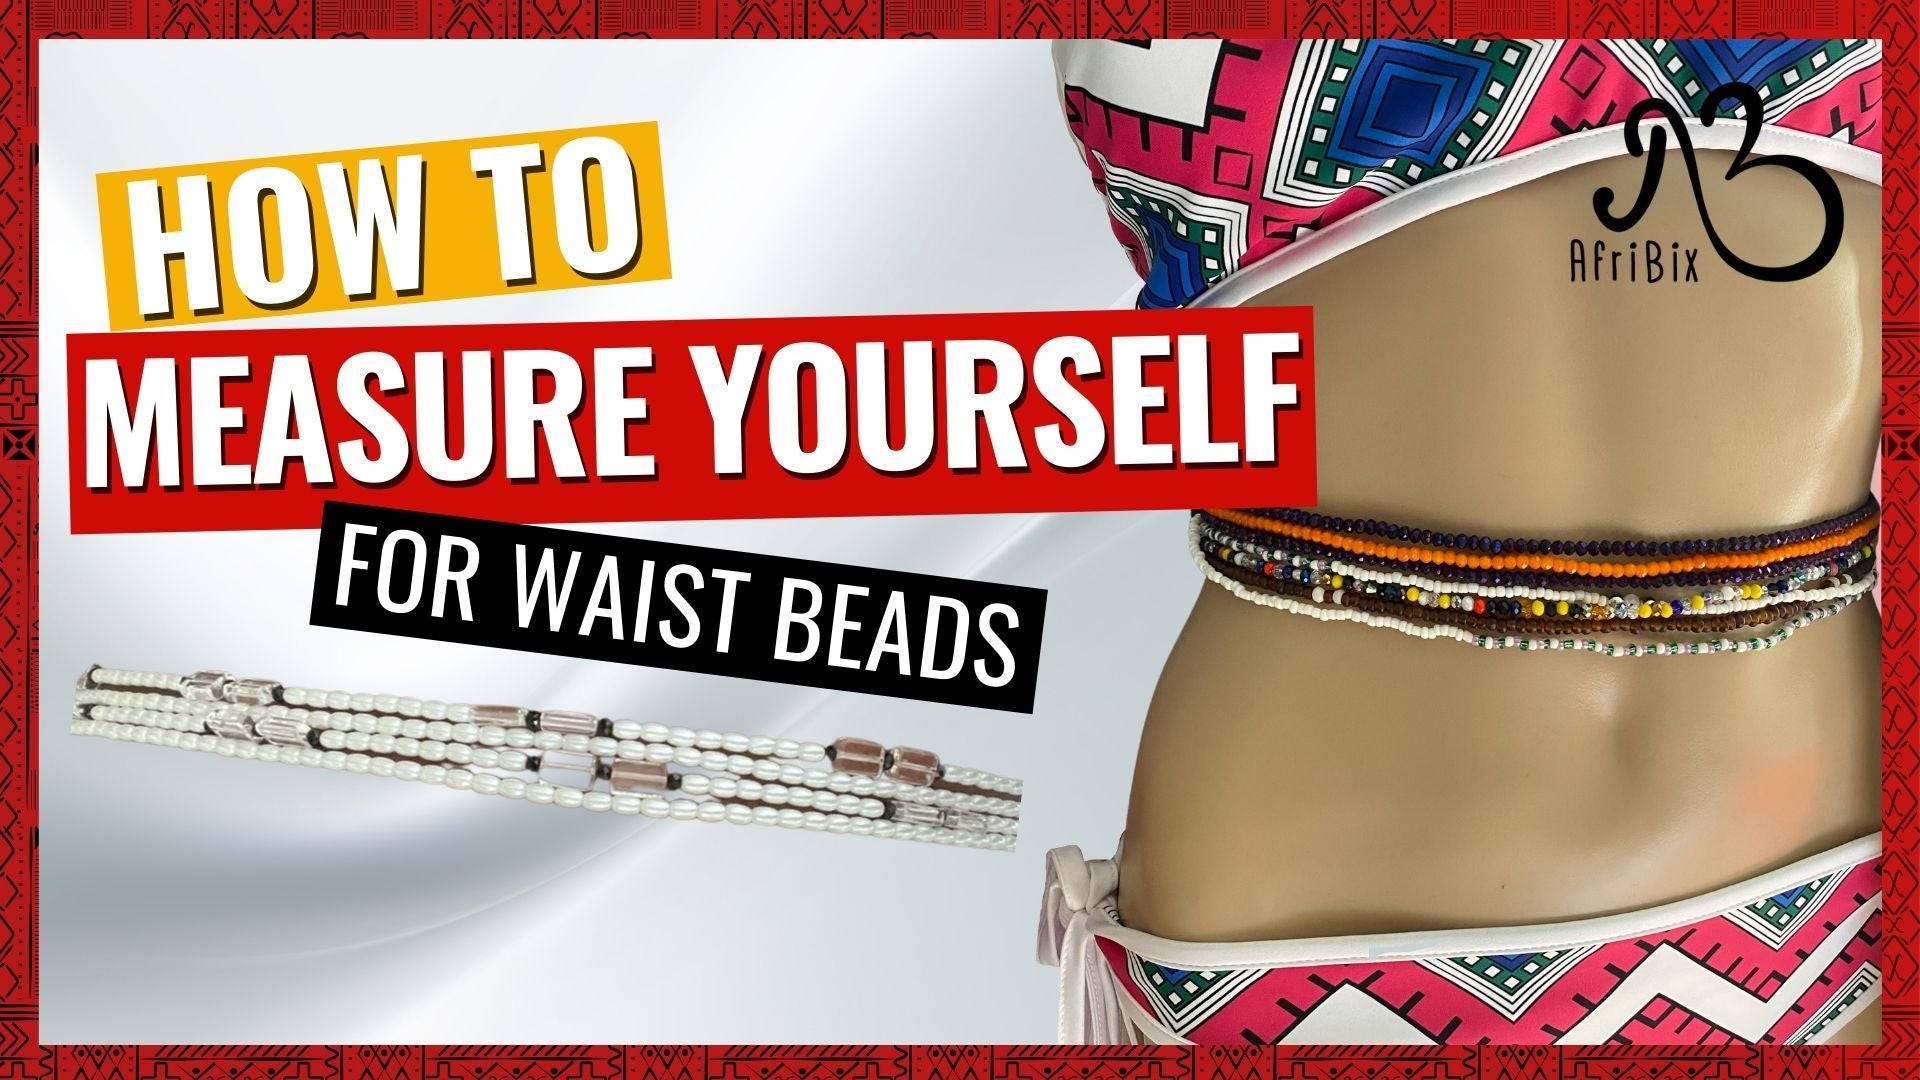 Load video: How to measure yourself for a waist bead